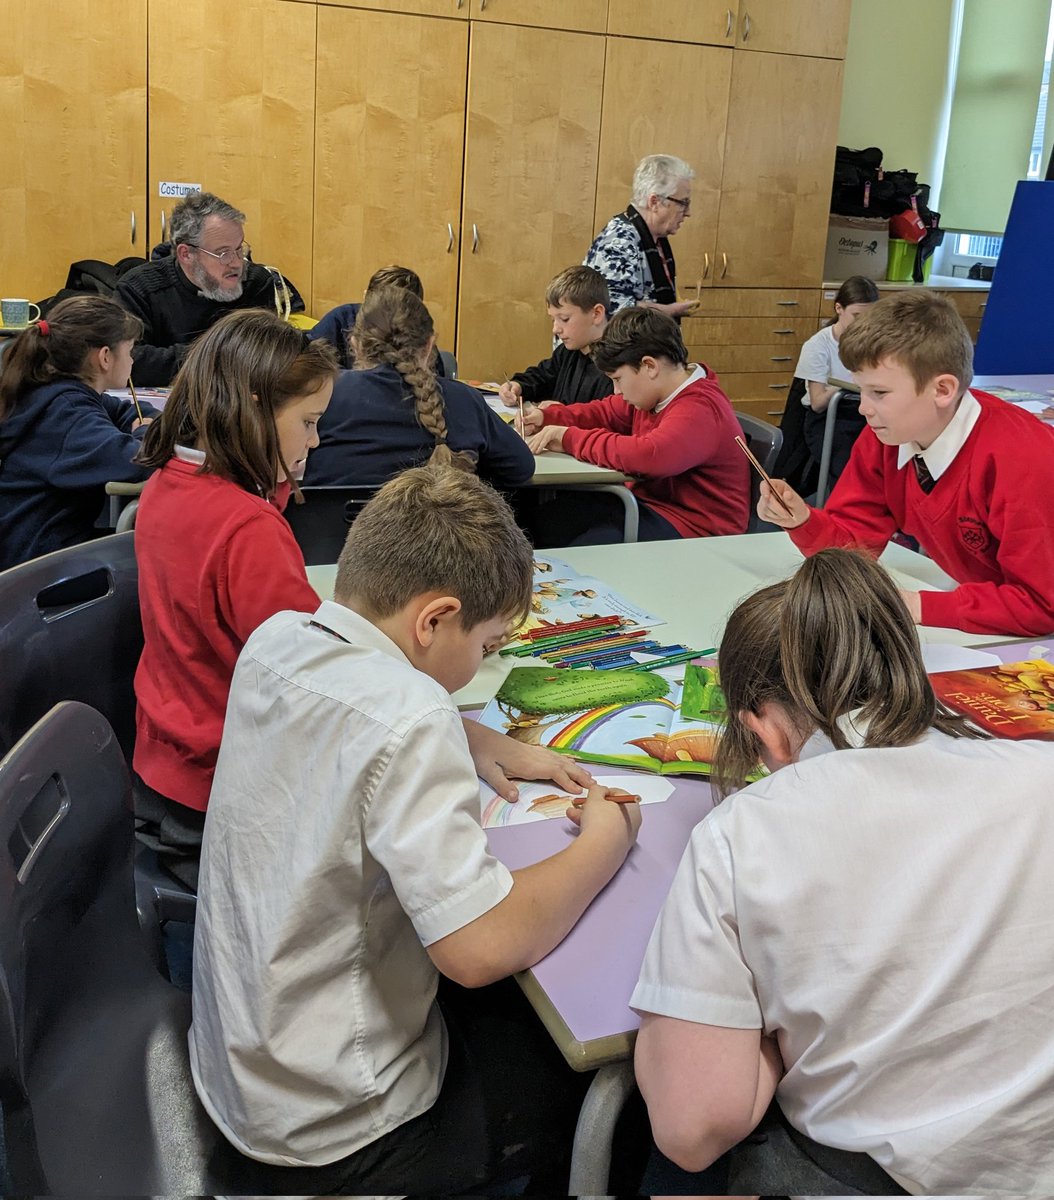 Great meeting of creative minds as our Adult and Children's Faith Teams talked about their favourite bible stories demonstrating our value of 'Love'. Looking forward to the artistic outcomes #stainedglass...